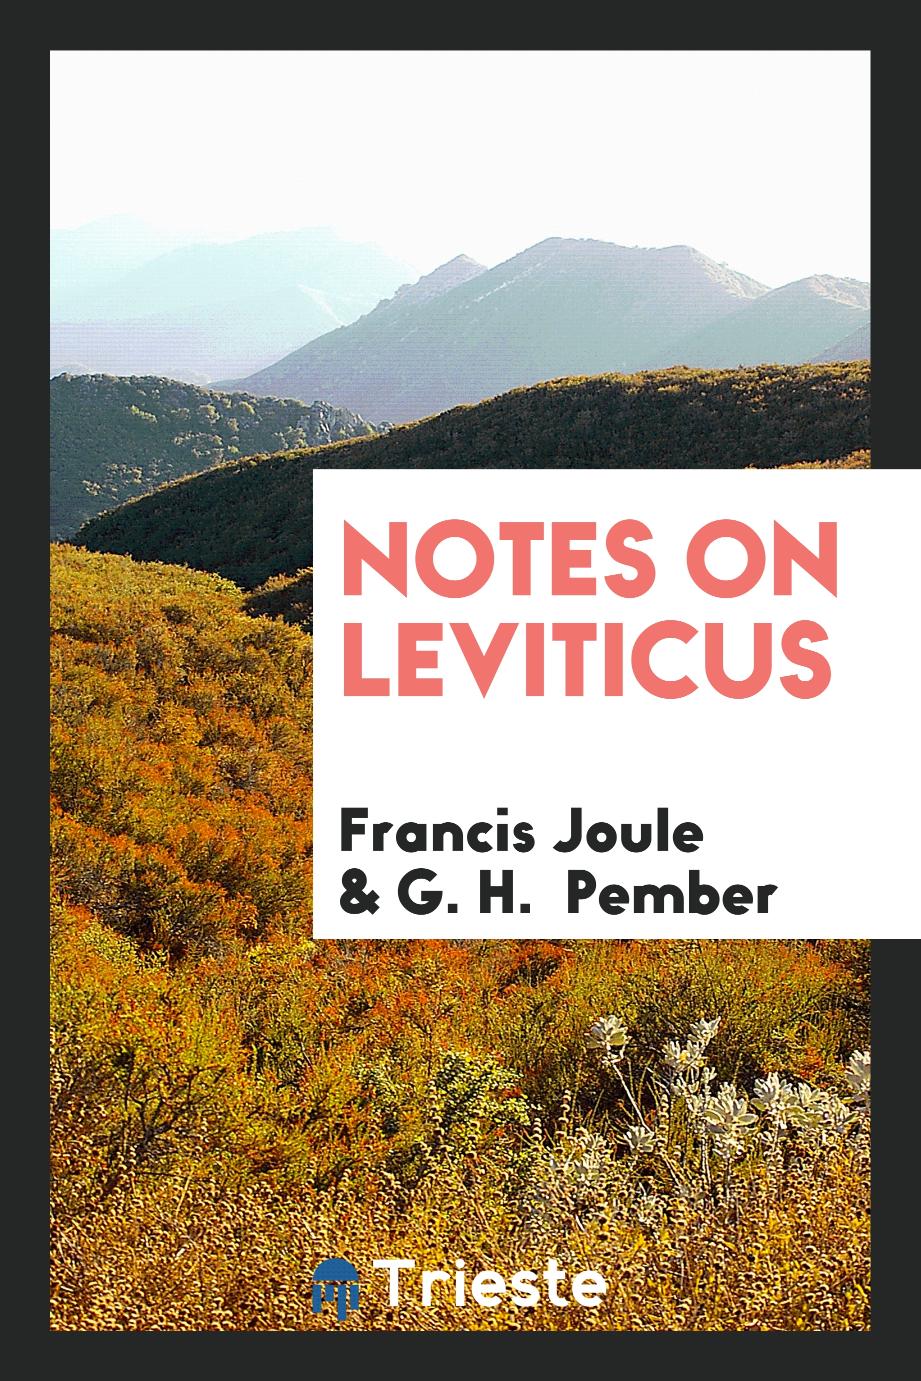 Notes on Leviticus